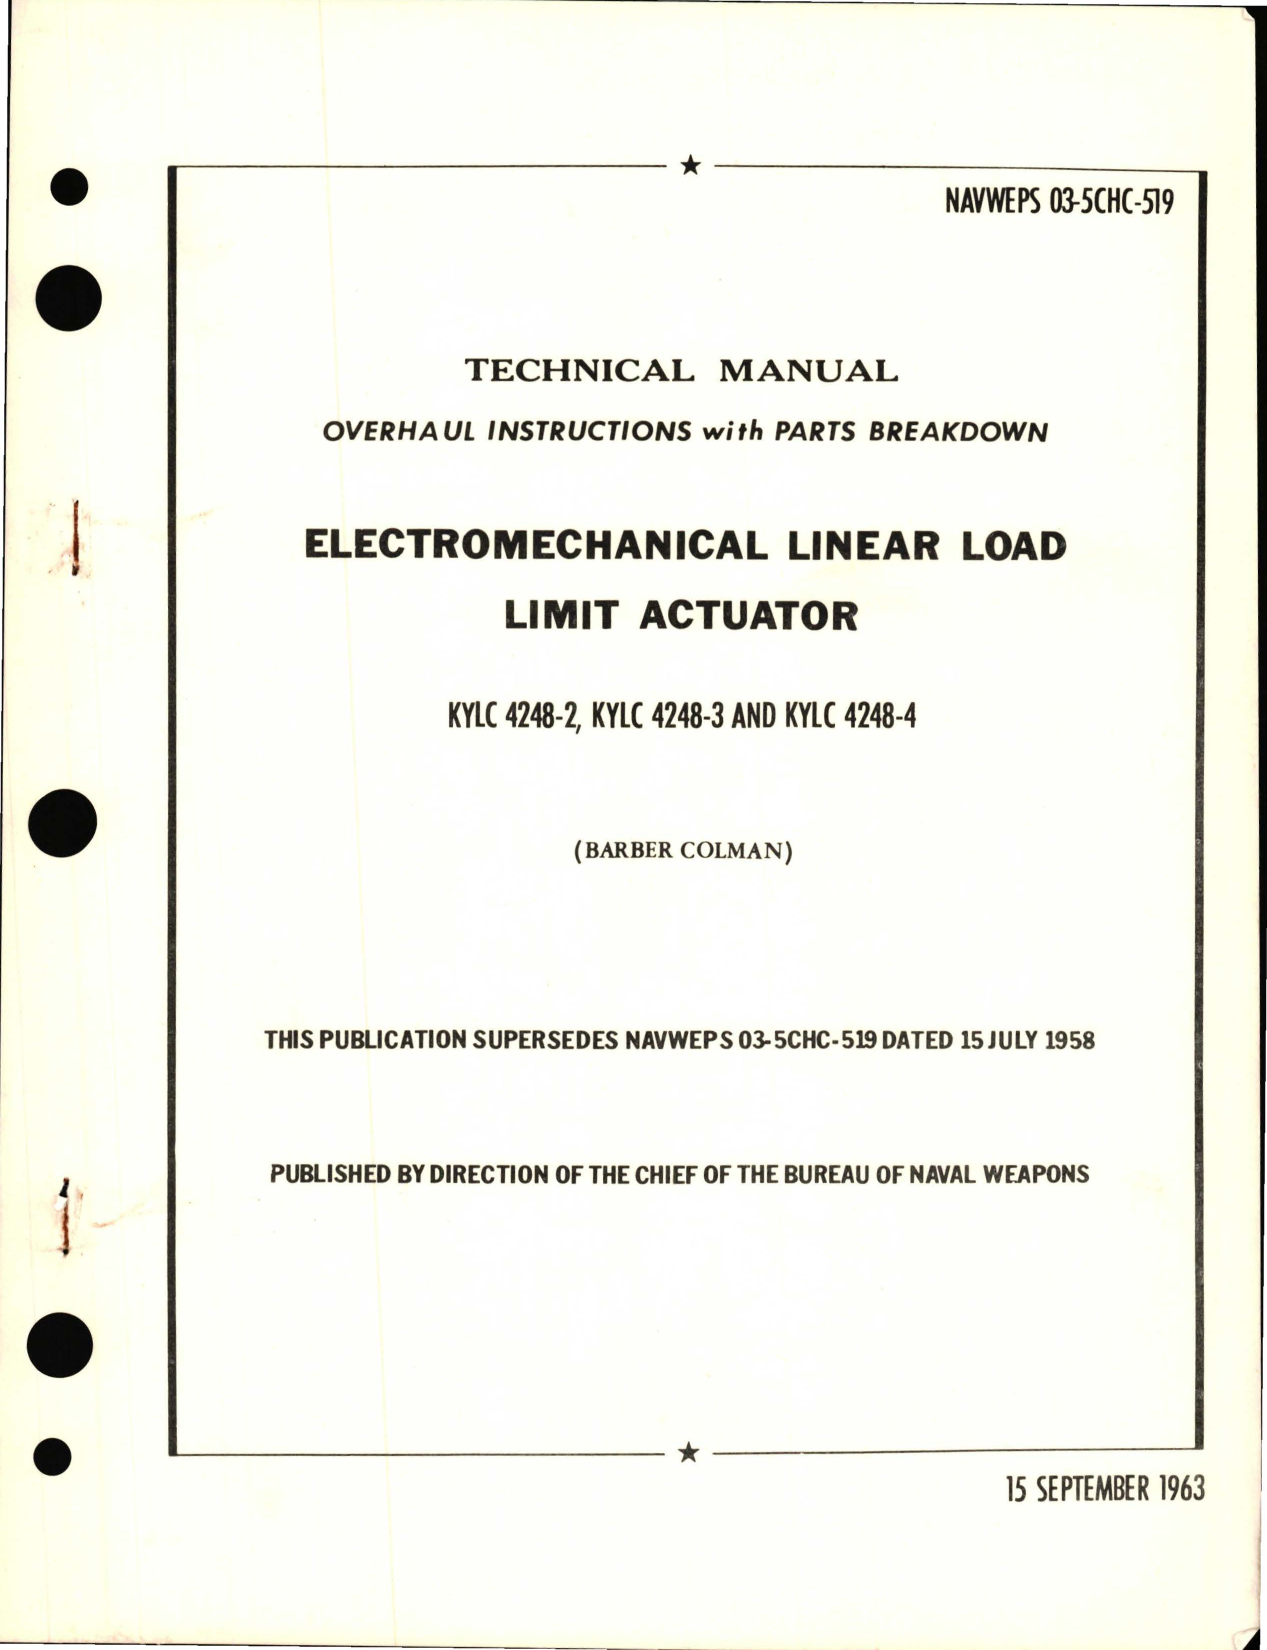 Sample page 1 from AirCorps Library document: Overhaul Instructions with Parts Breakdown for Electromechanical Linear Load Limit Actuator - KYLC 4248-2, KYLC 4248-3 and KYLC 4248-4